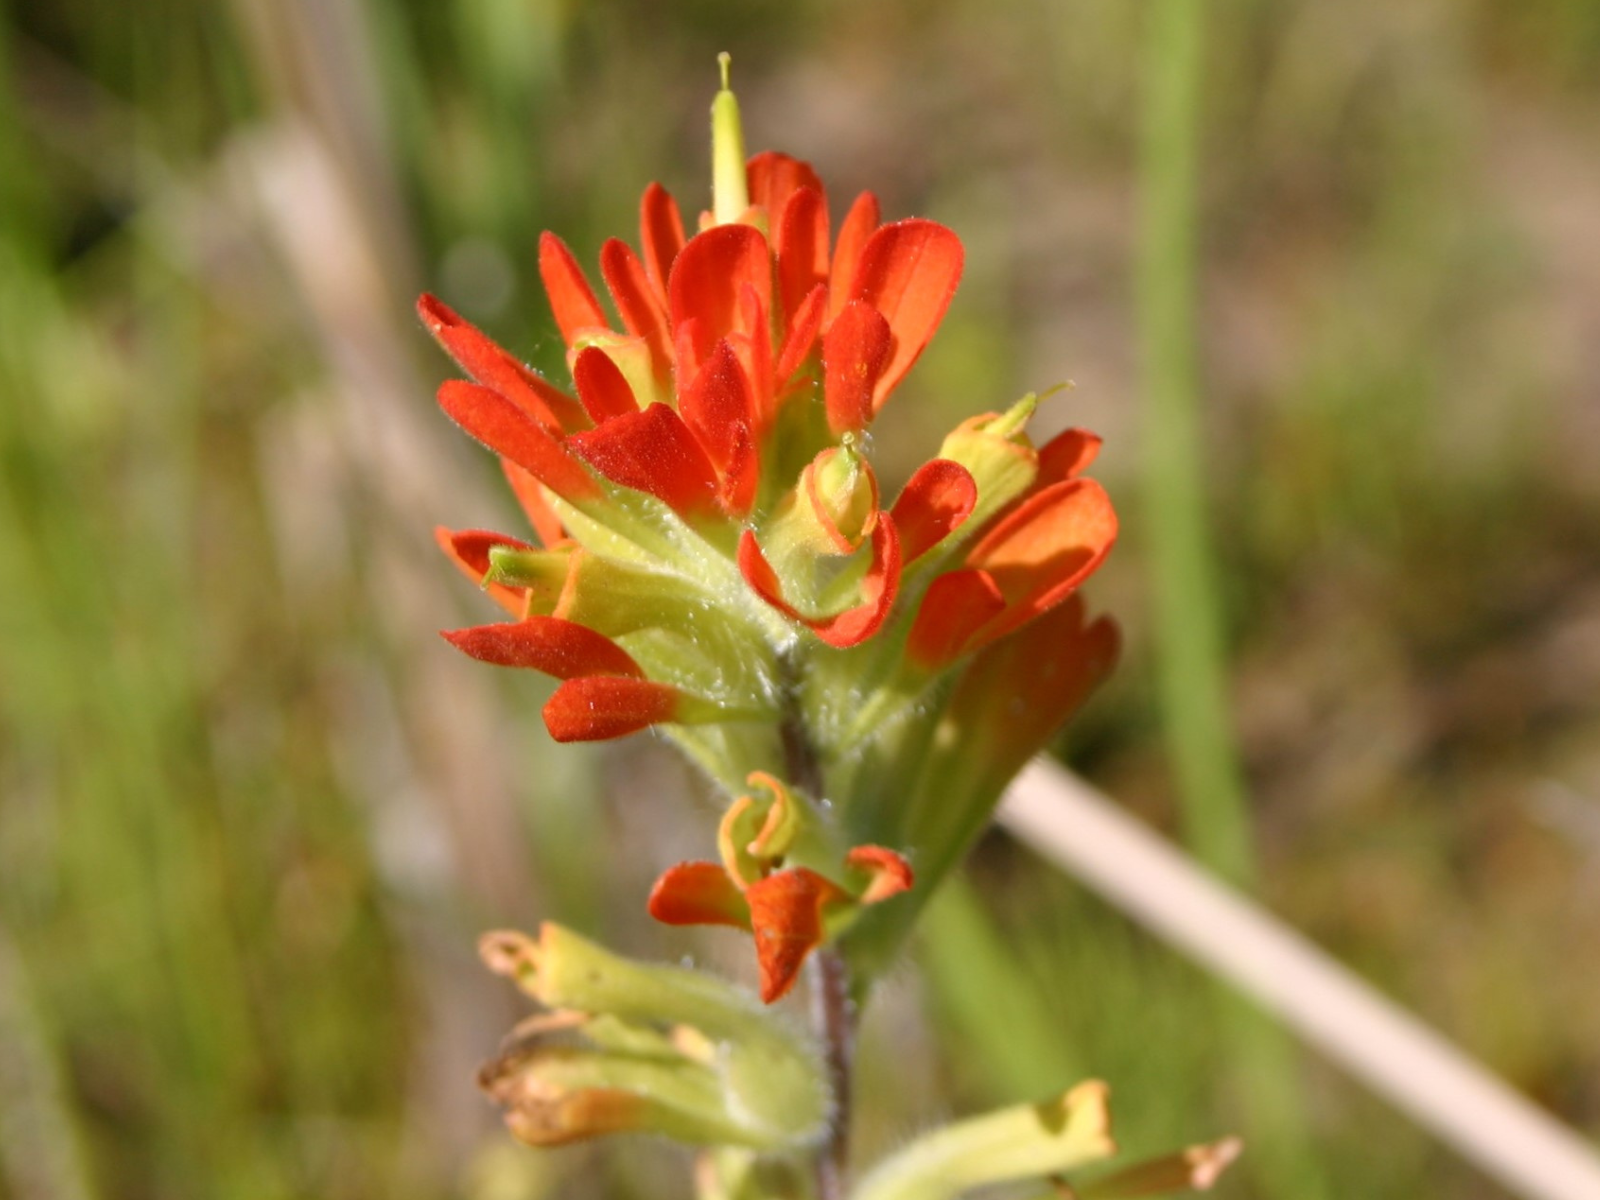 Close-up on a plant, showing a cluster of small, orangey-red flowers at the top of the stem.